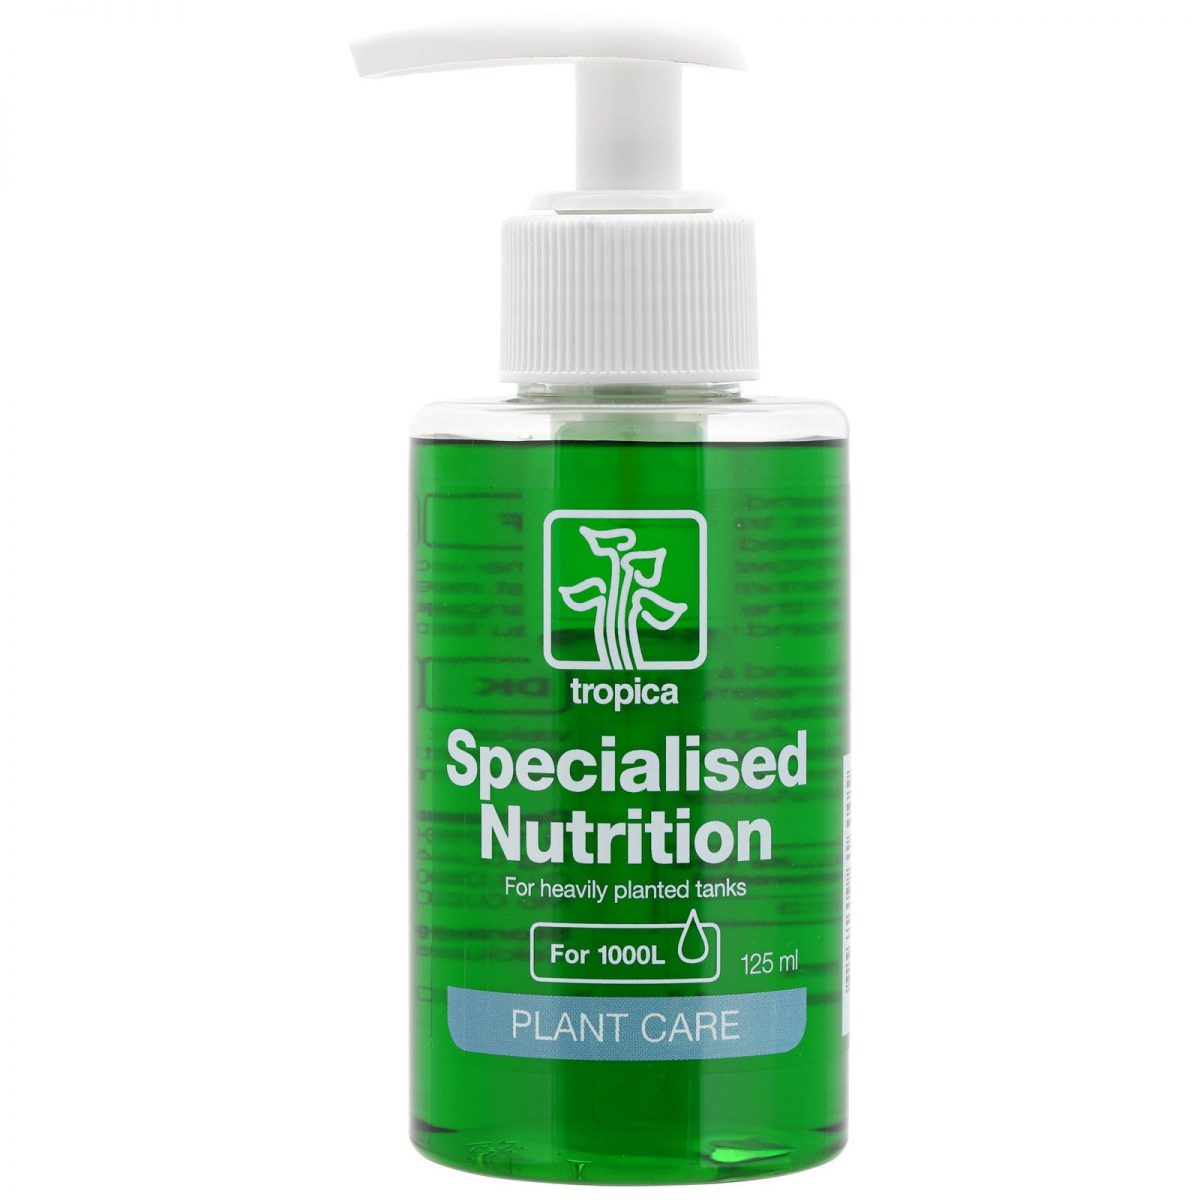 Tropica - Specialised Nutrition 125ml